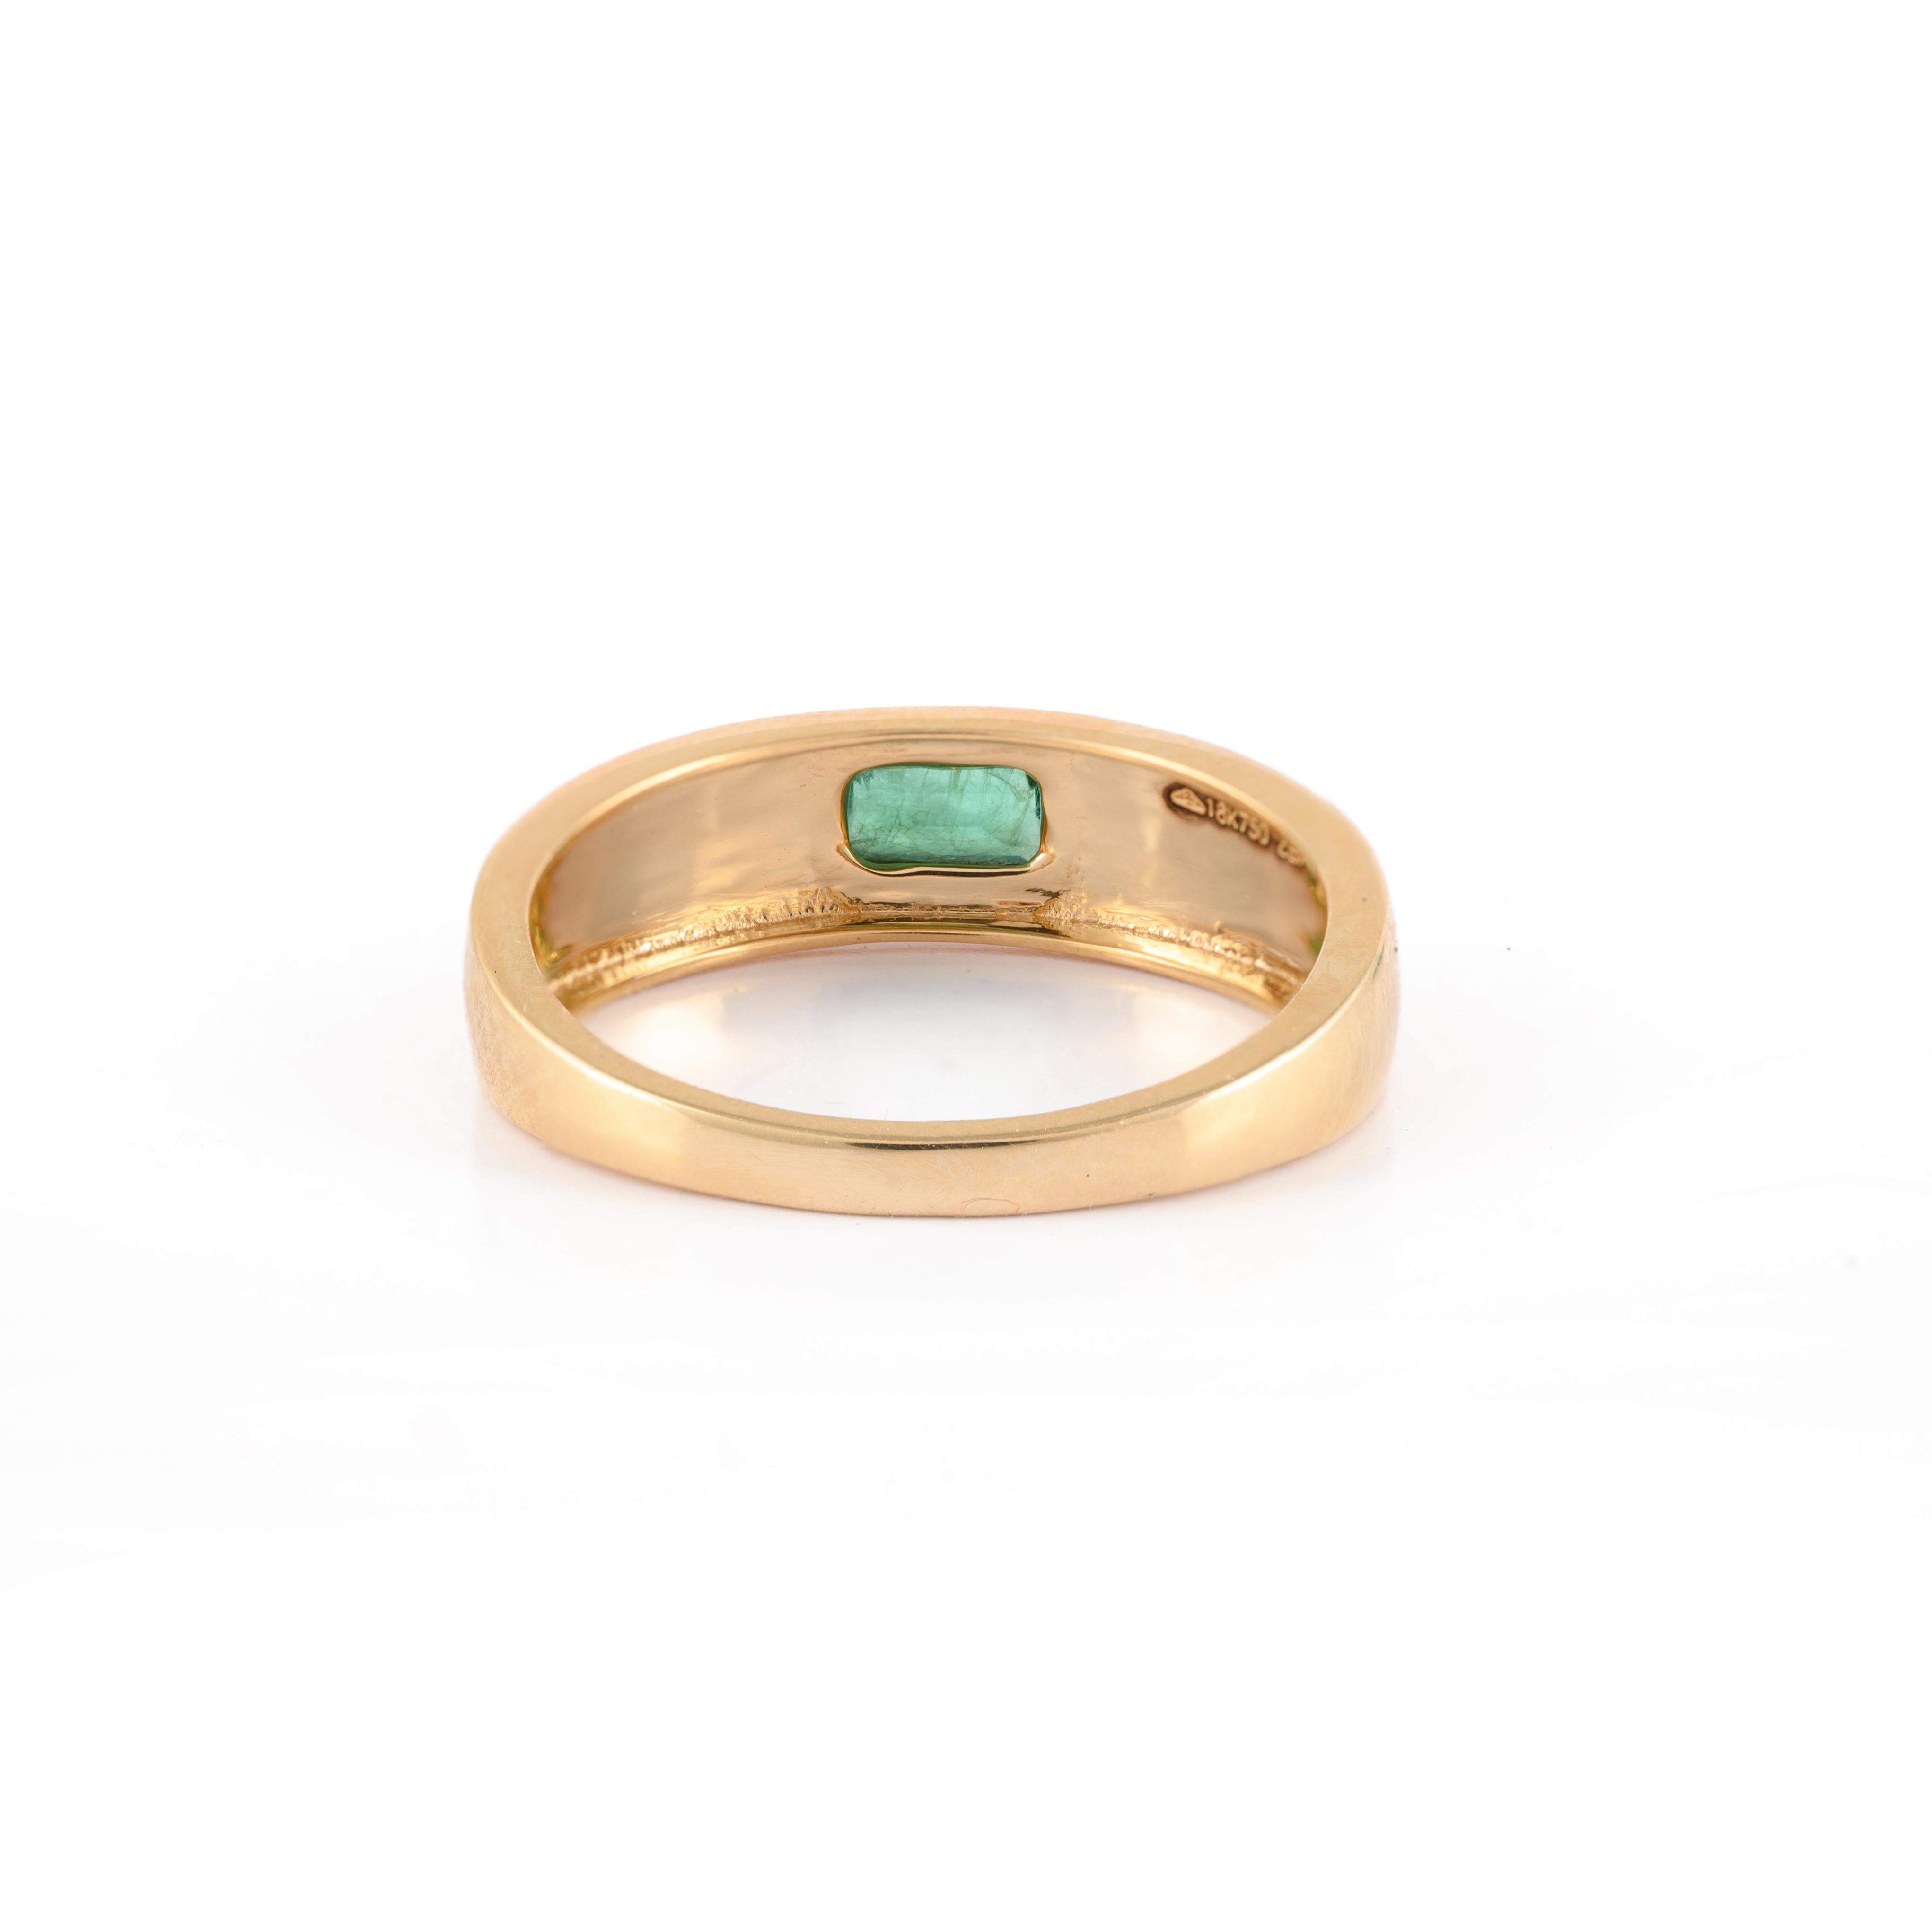 For Sale:  Unisex Natural Baguette Cut Emerald May Birthstone Ring in 18k Yellow Gold 6